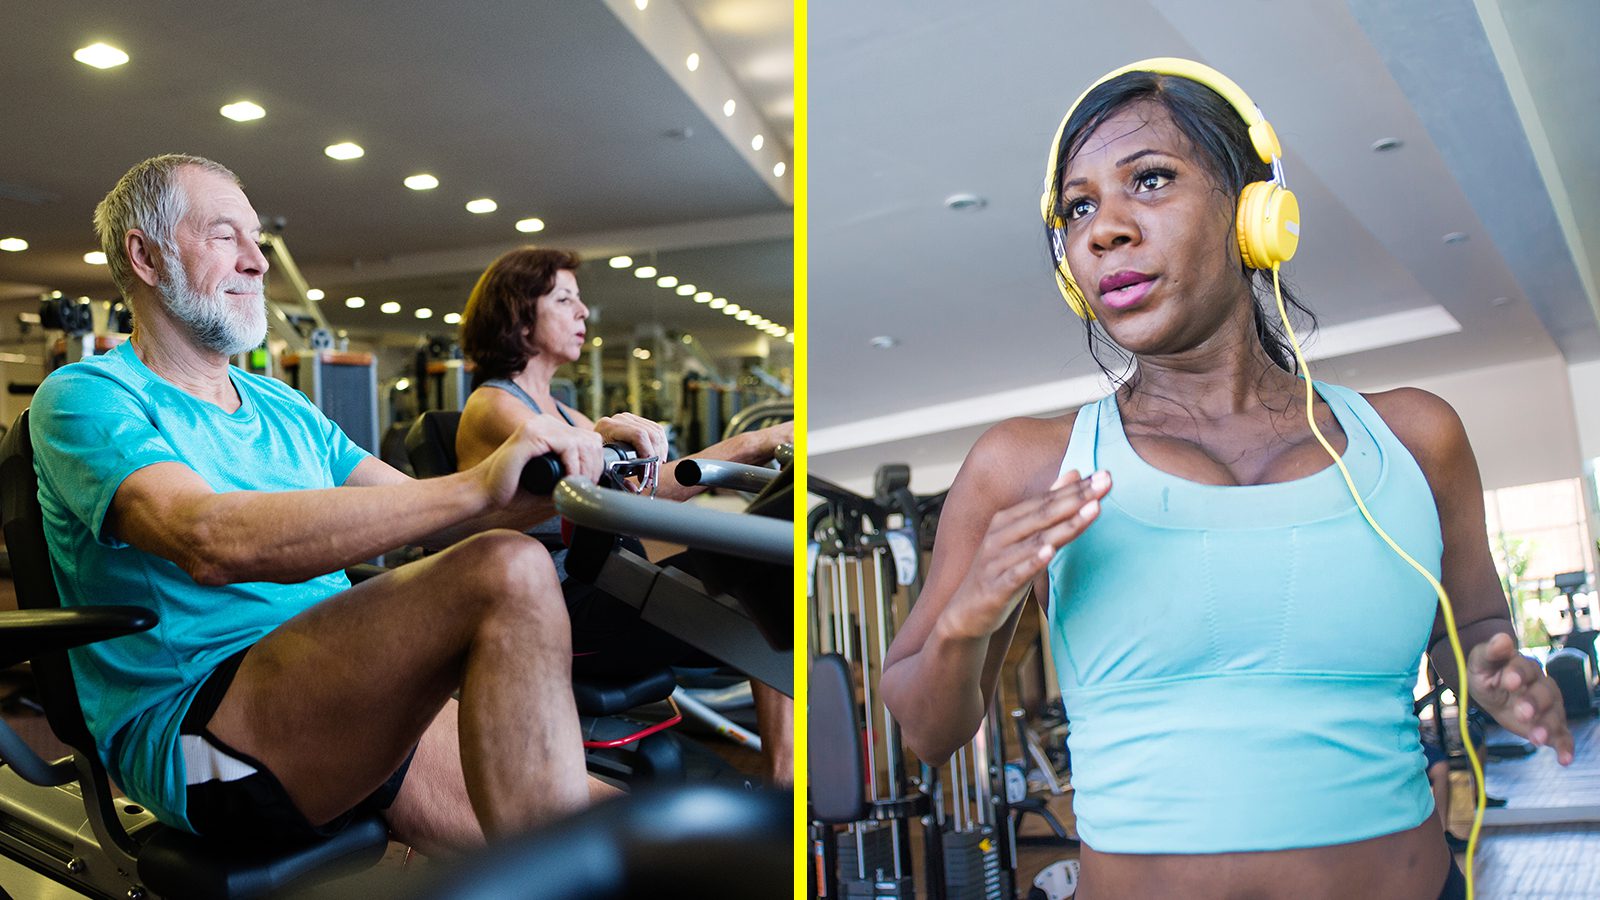 Doctors Explain 5 Exercises That Can Increase Your Cardio Workouts